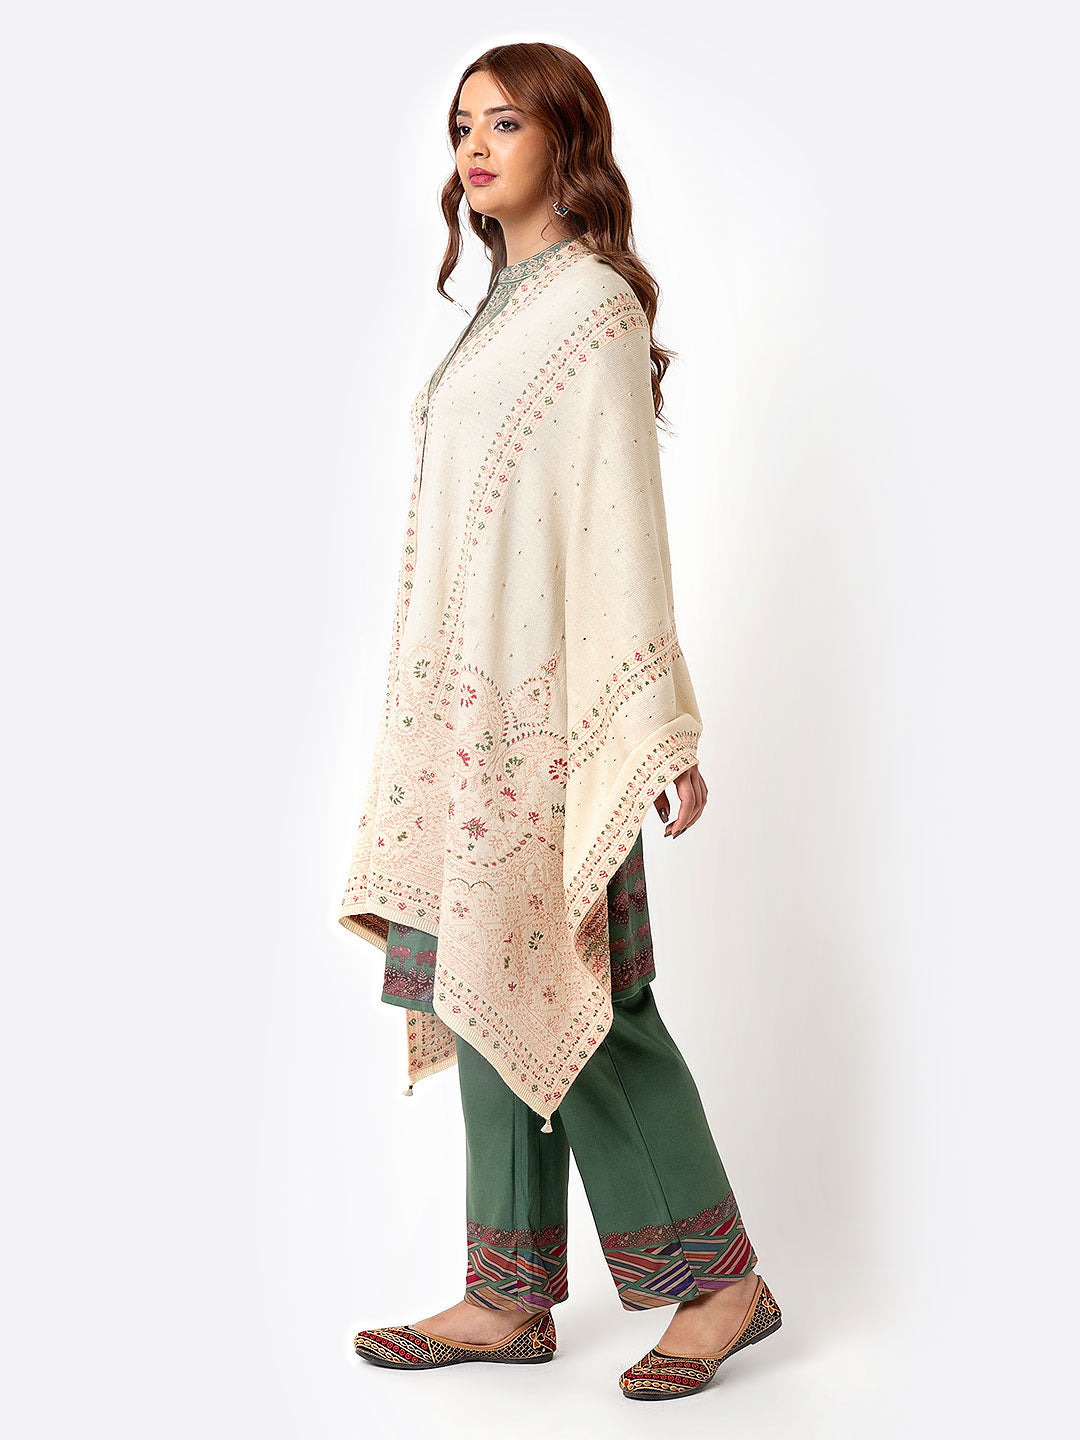 Camel Intricate Detailing Knitted Shawl